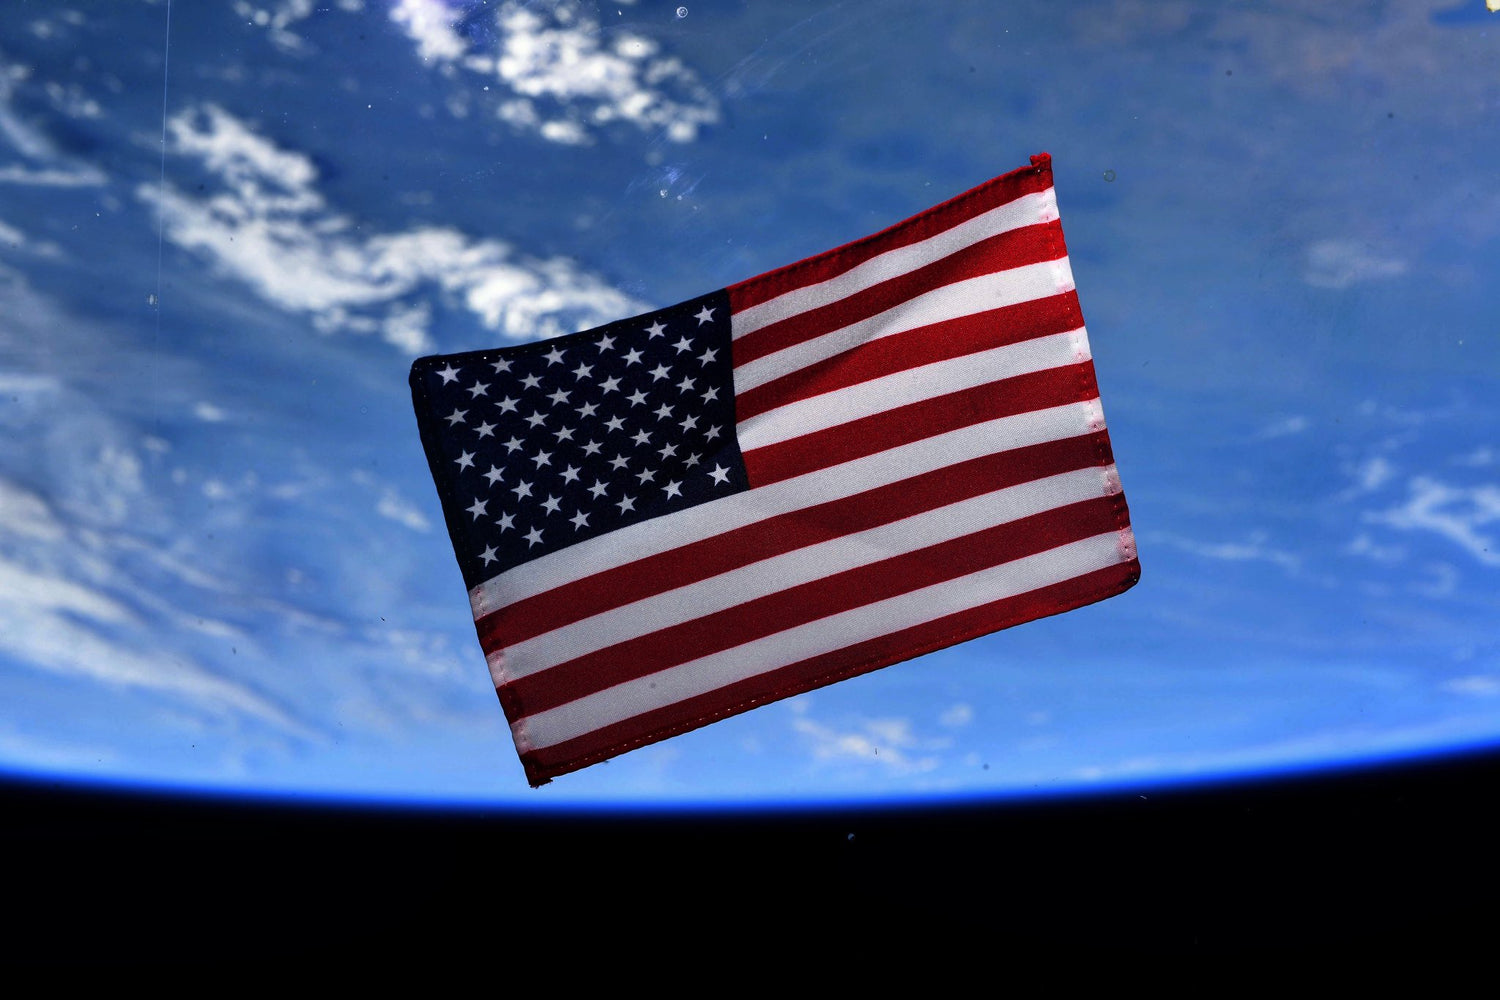 NASA Astronauts share plans to return historic U.S. flag aboard SpaceX's Dragon as they commemorate July 4th